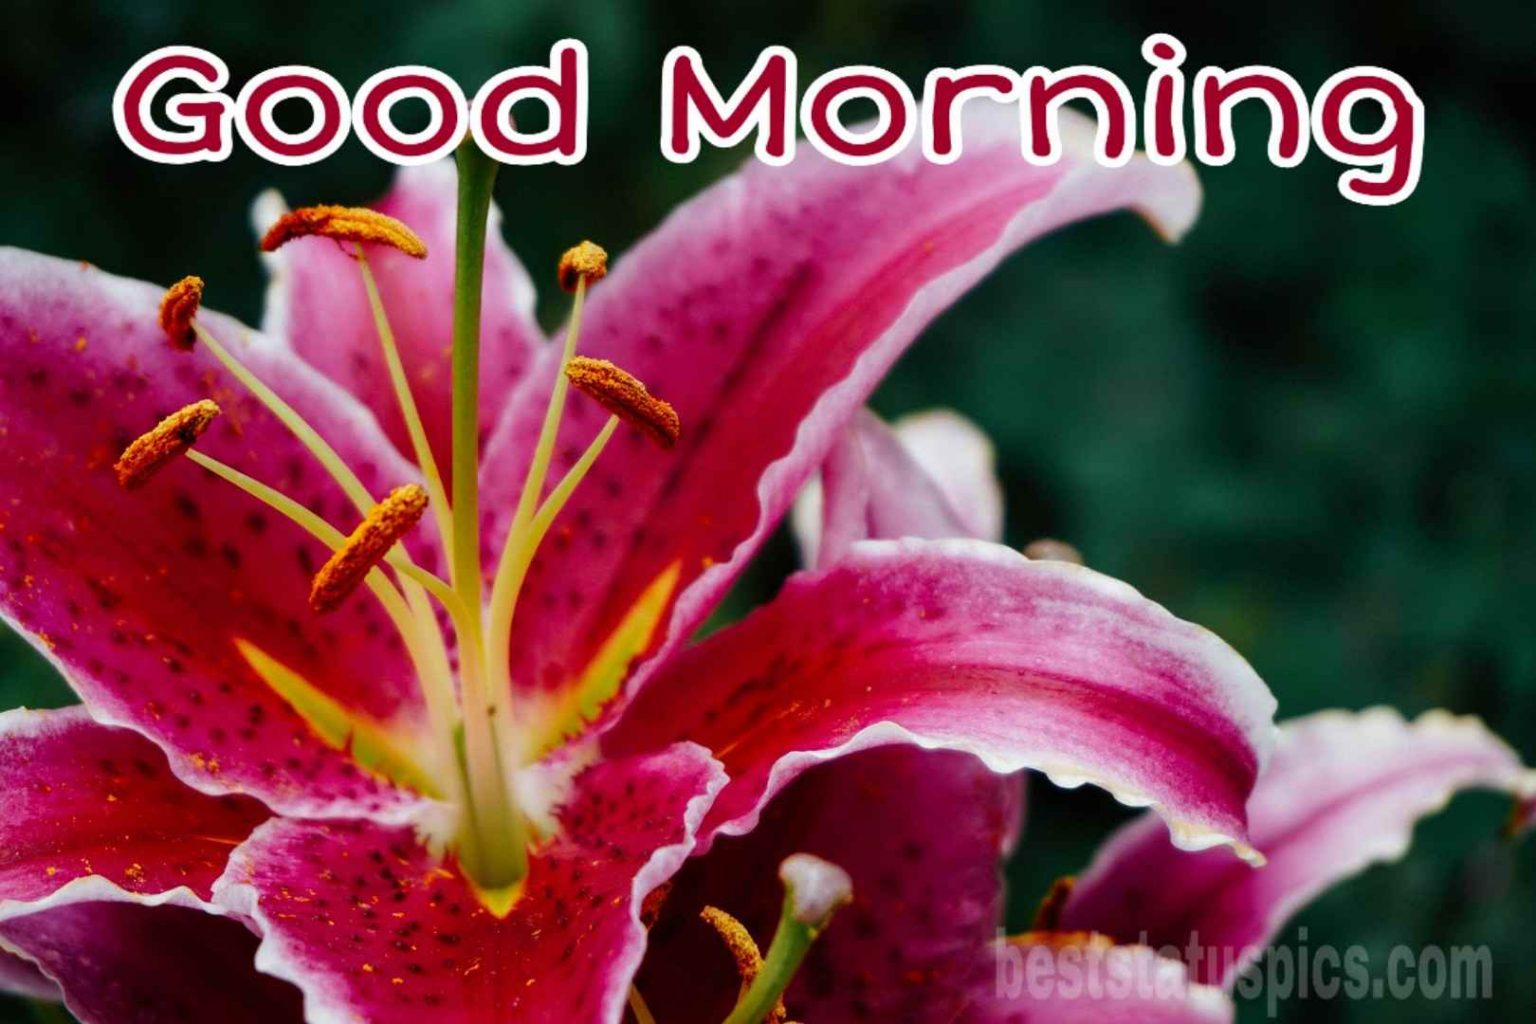 Good Morning Lily Images For WhatsApp